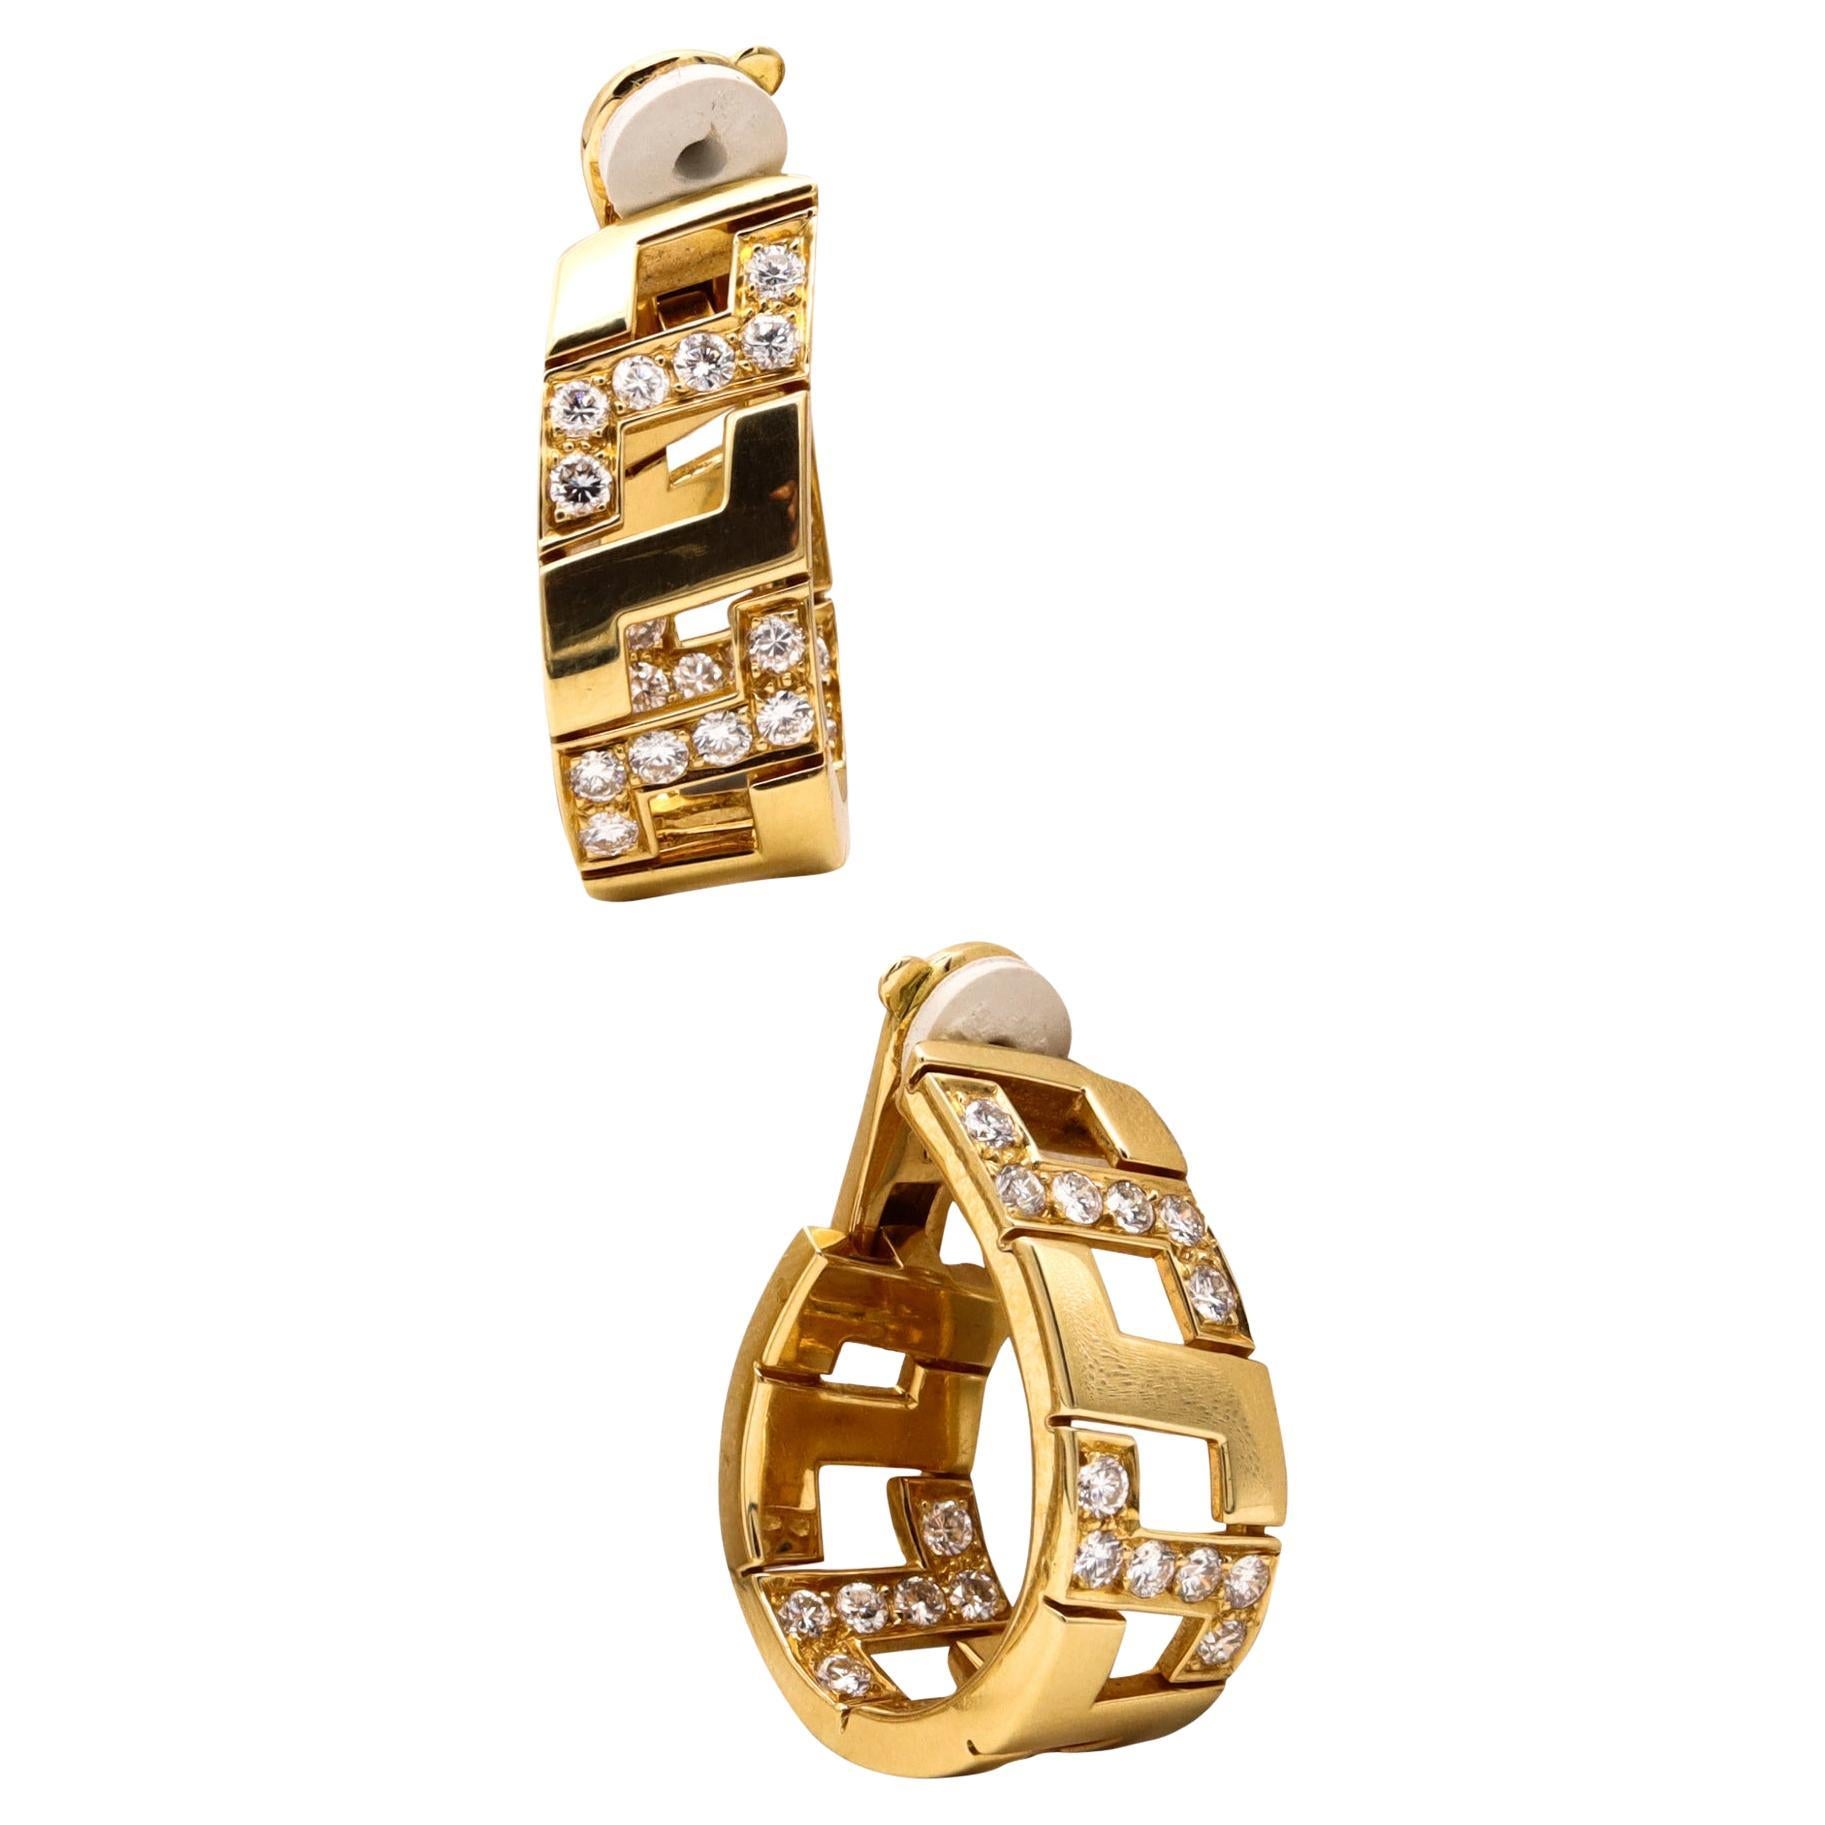 Cartier Paris 18Kt Gold Etruscan Earrings Hoops with 2.88 Cts in VVS Diamonds